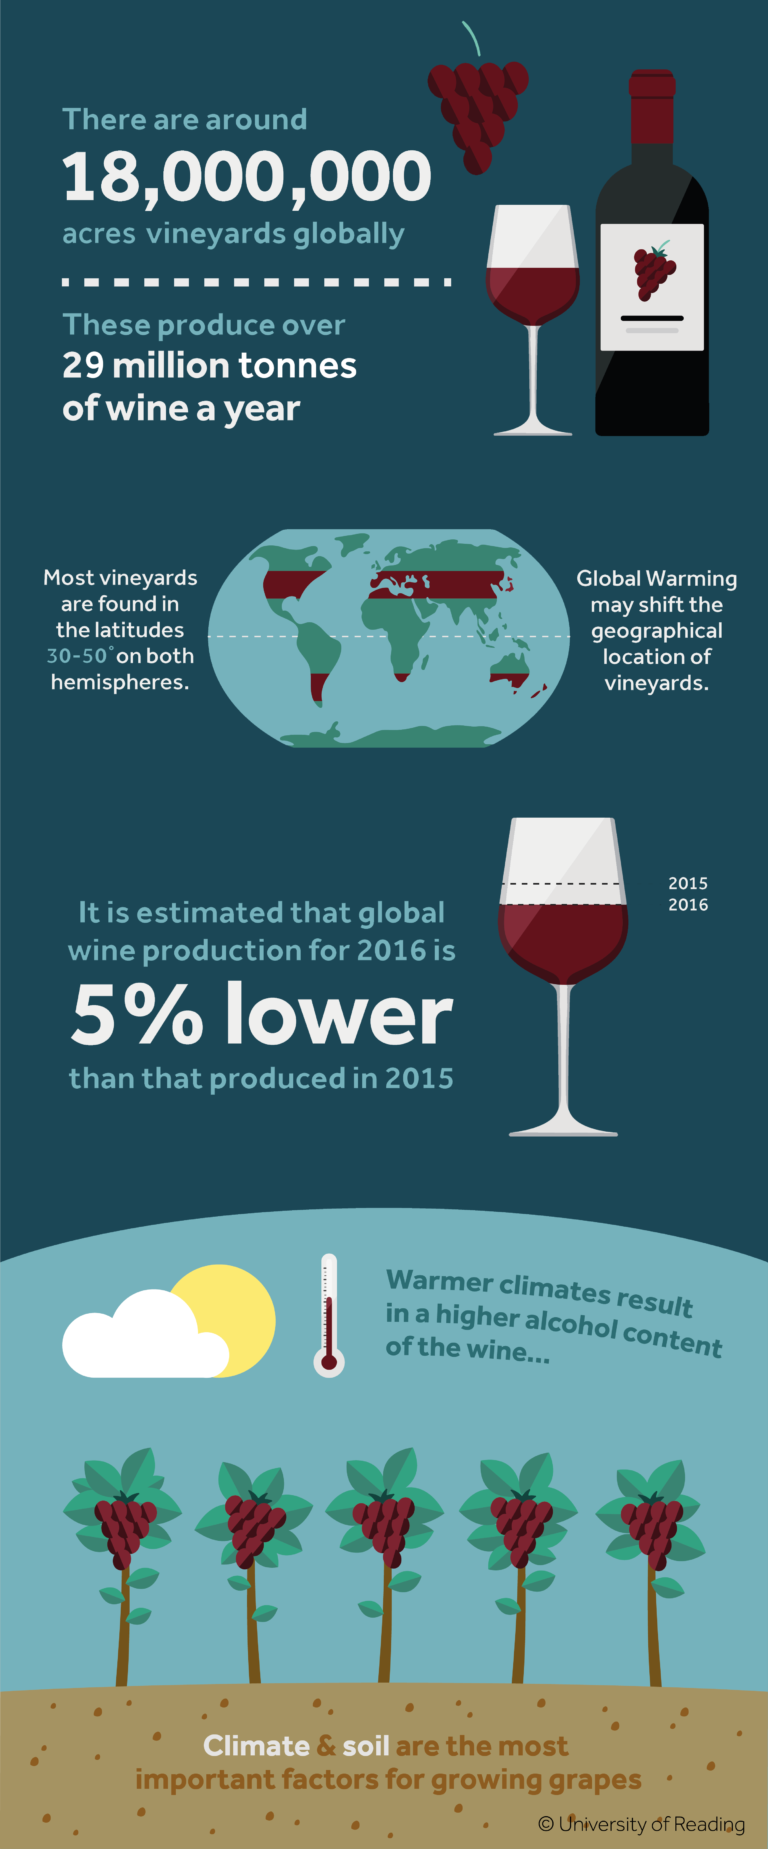 Infographic on the wine industry stating the following: There are around 18,000 vineyards globally. These produce over 28 million hectolitres of wine a year. Most vineyards are found in the latitudes 30-50 degrees on both hemispheres. Global Warming may shift the geographical location of vineyards. It is estimated that global wine production for 2016 is 5% lower than that produced in 2015. Warmer climates result in a higher alcohol content of the wine. Climate & soil are the most important factors for growing grapes.